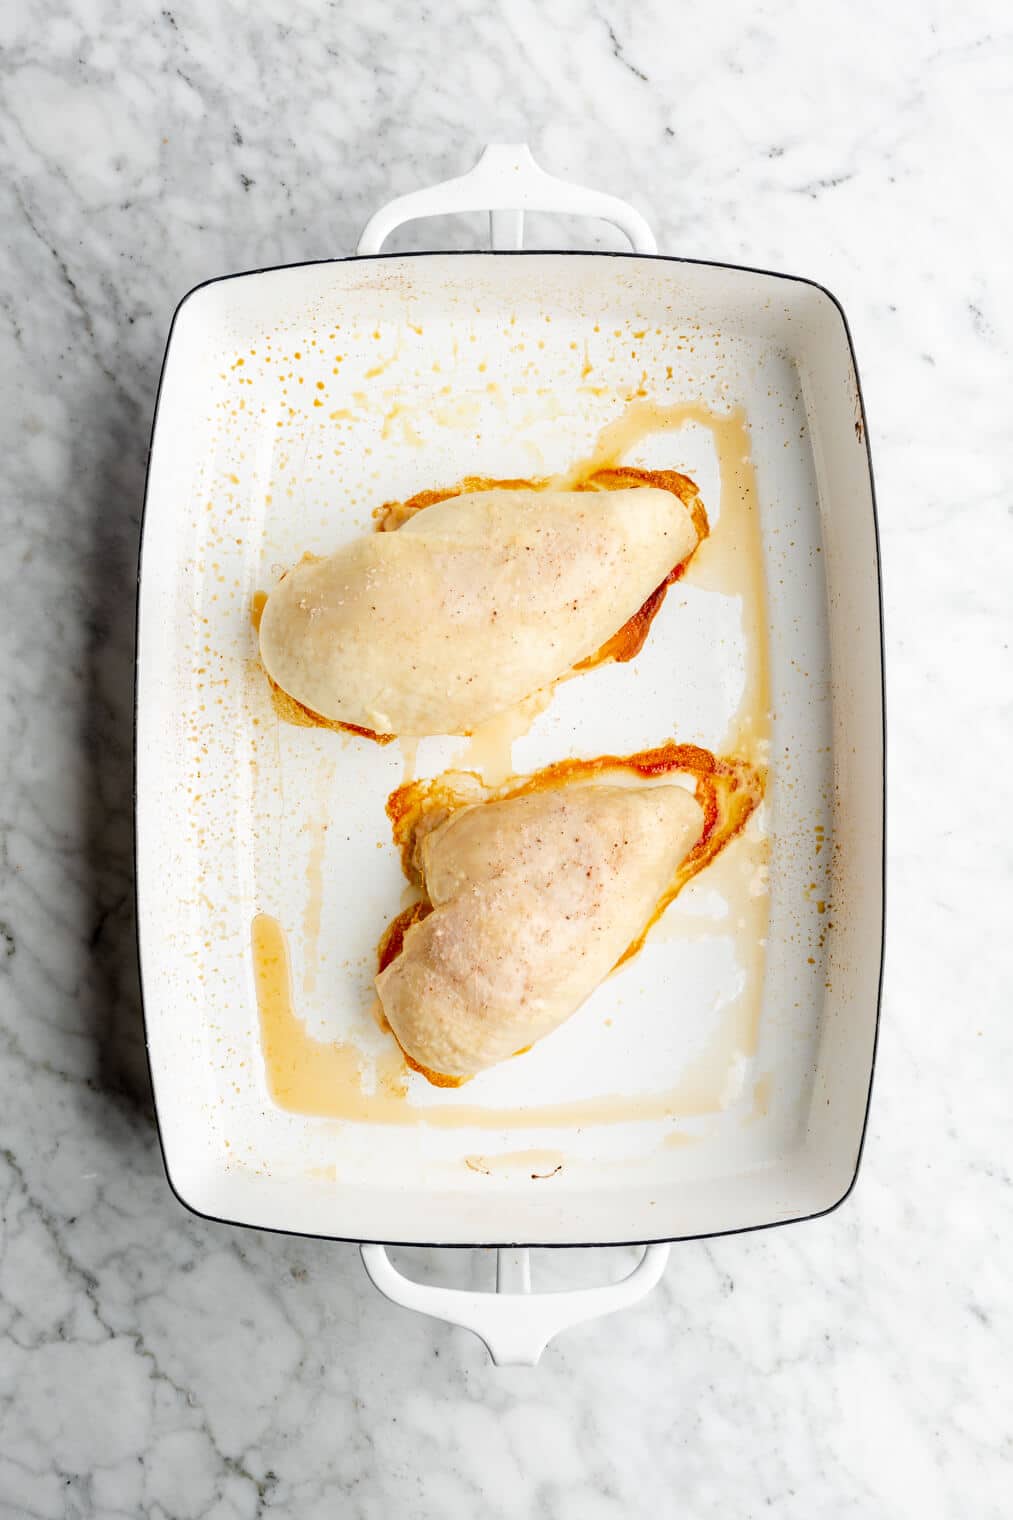 Top down view of two baked chicken breasts in a white casserole dish.